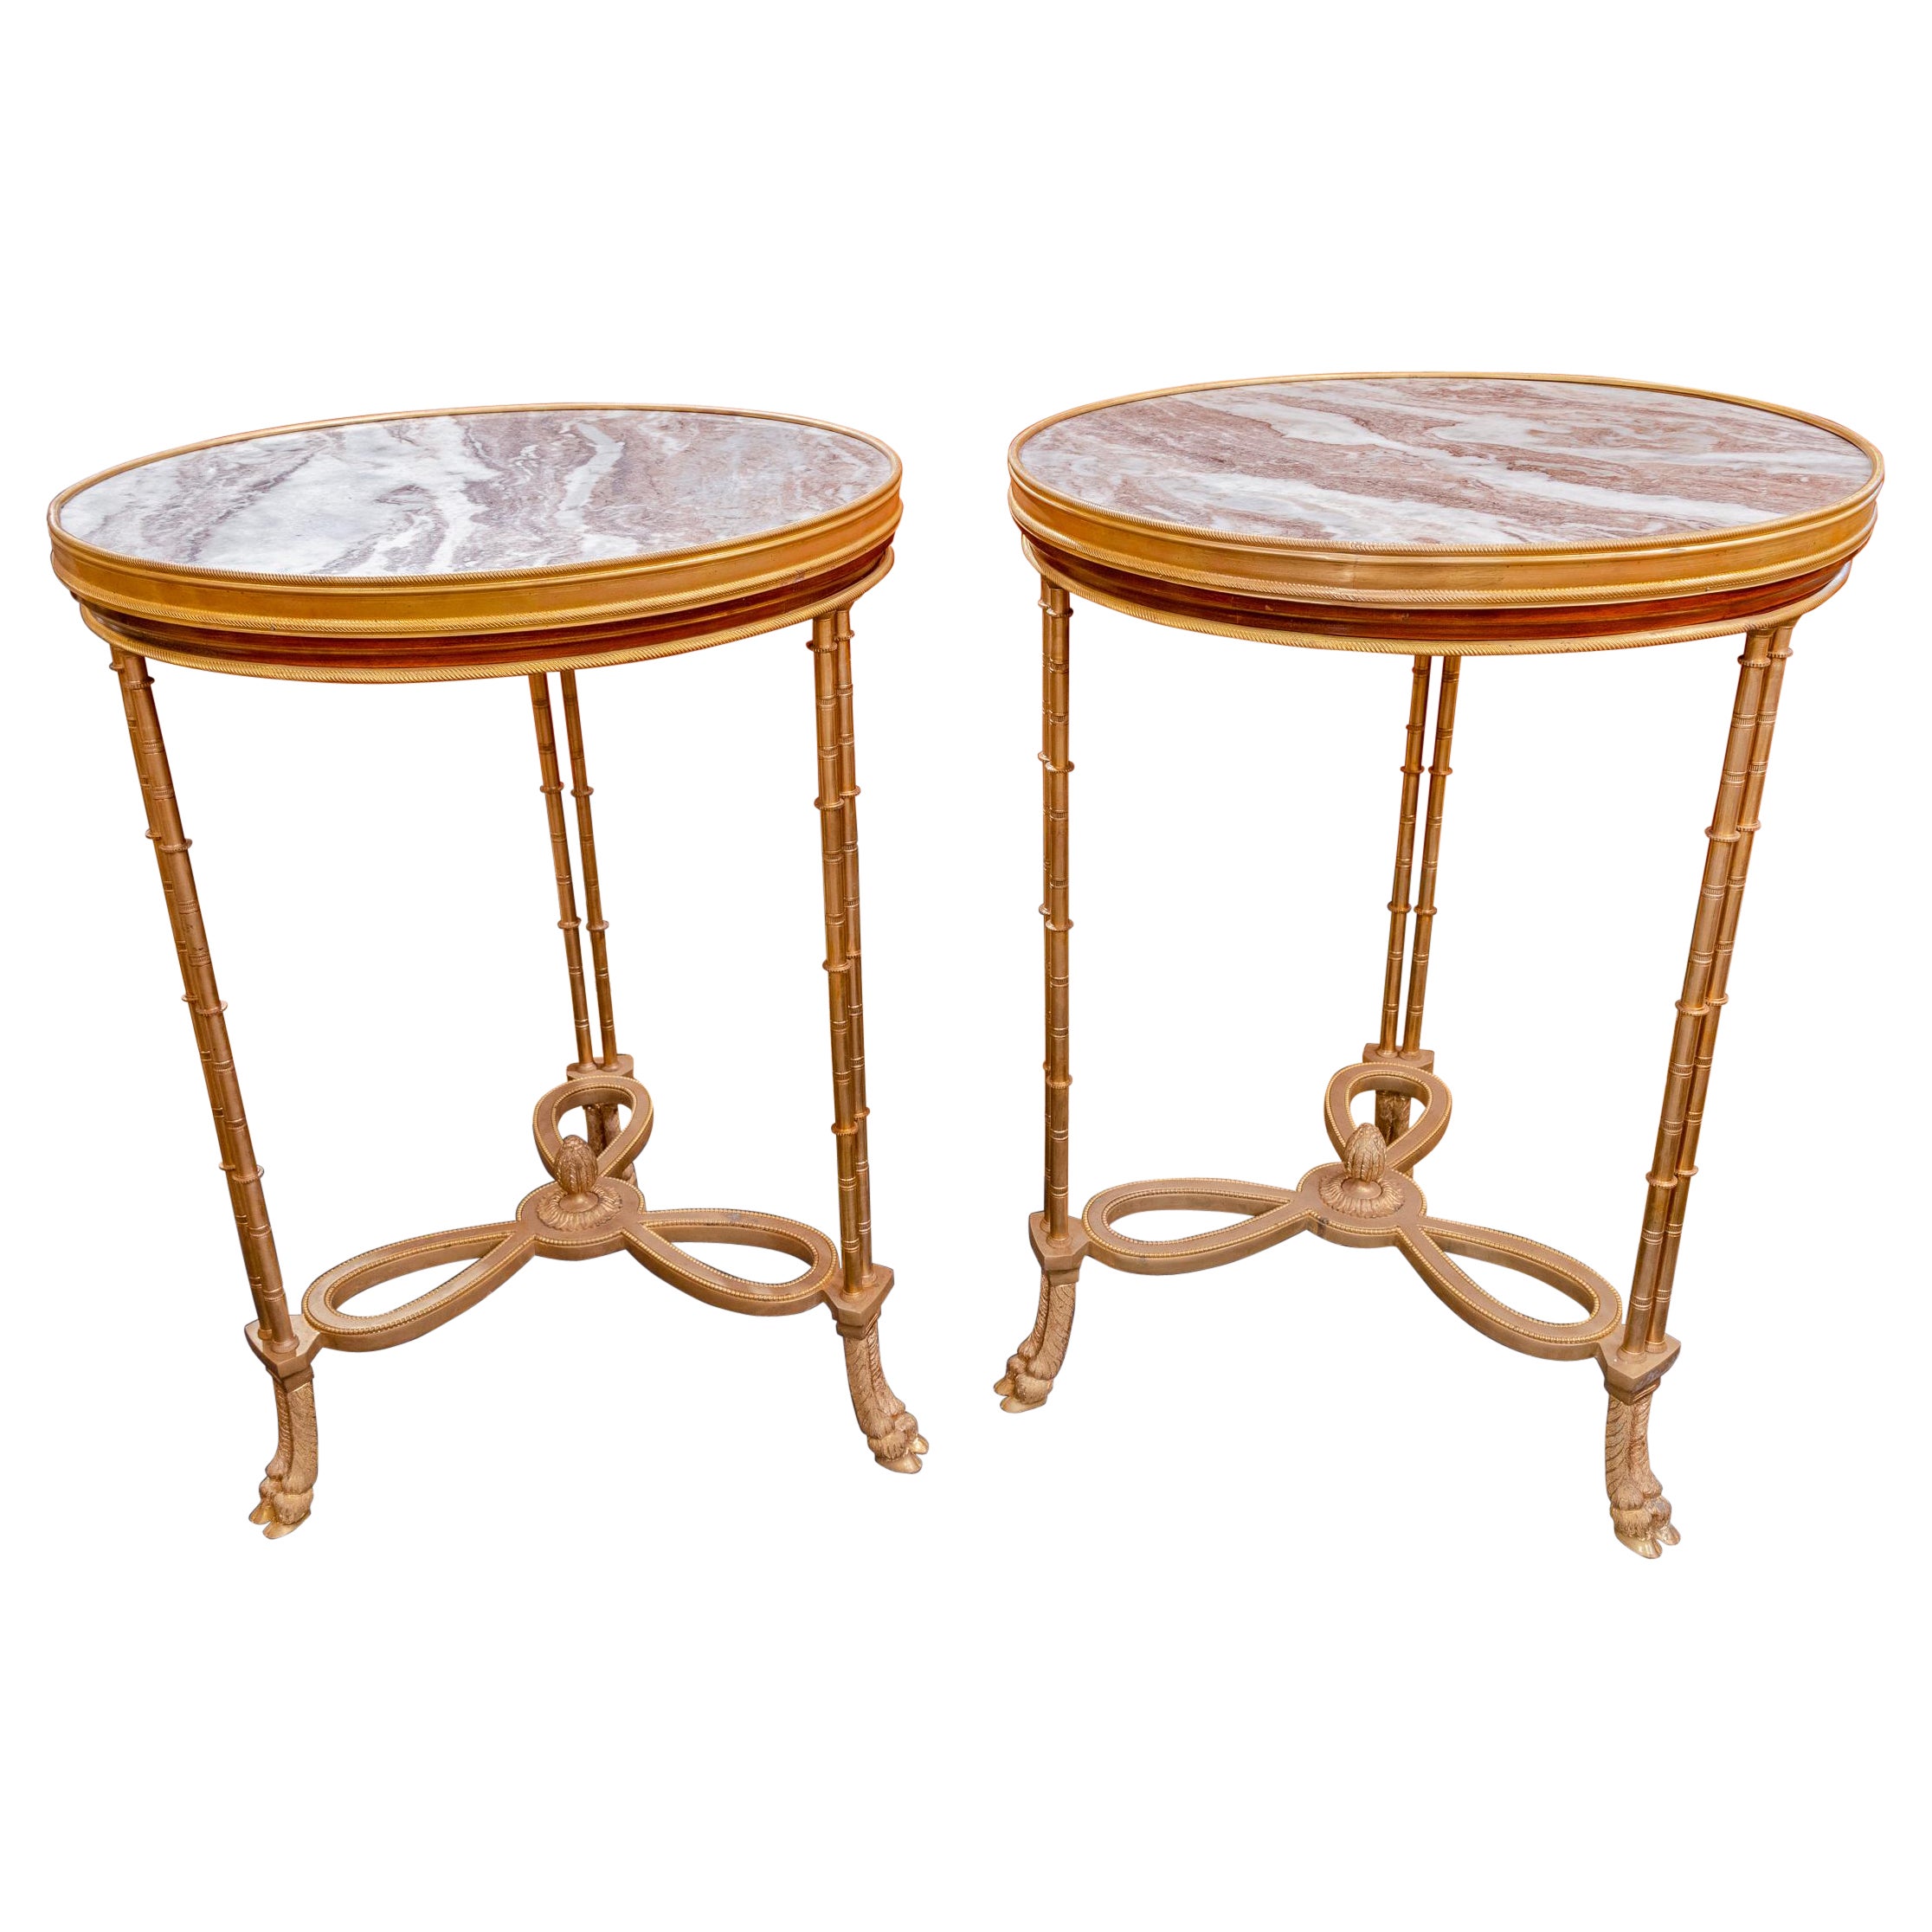 Fine Pair of French Empire Mahogany, Gilt Bronze and Marble Gueridon Tables